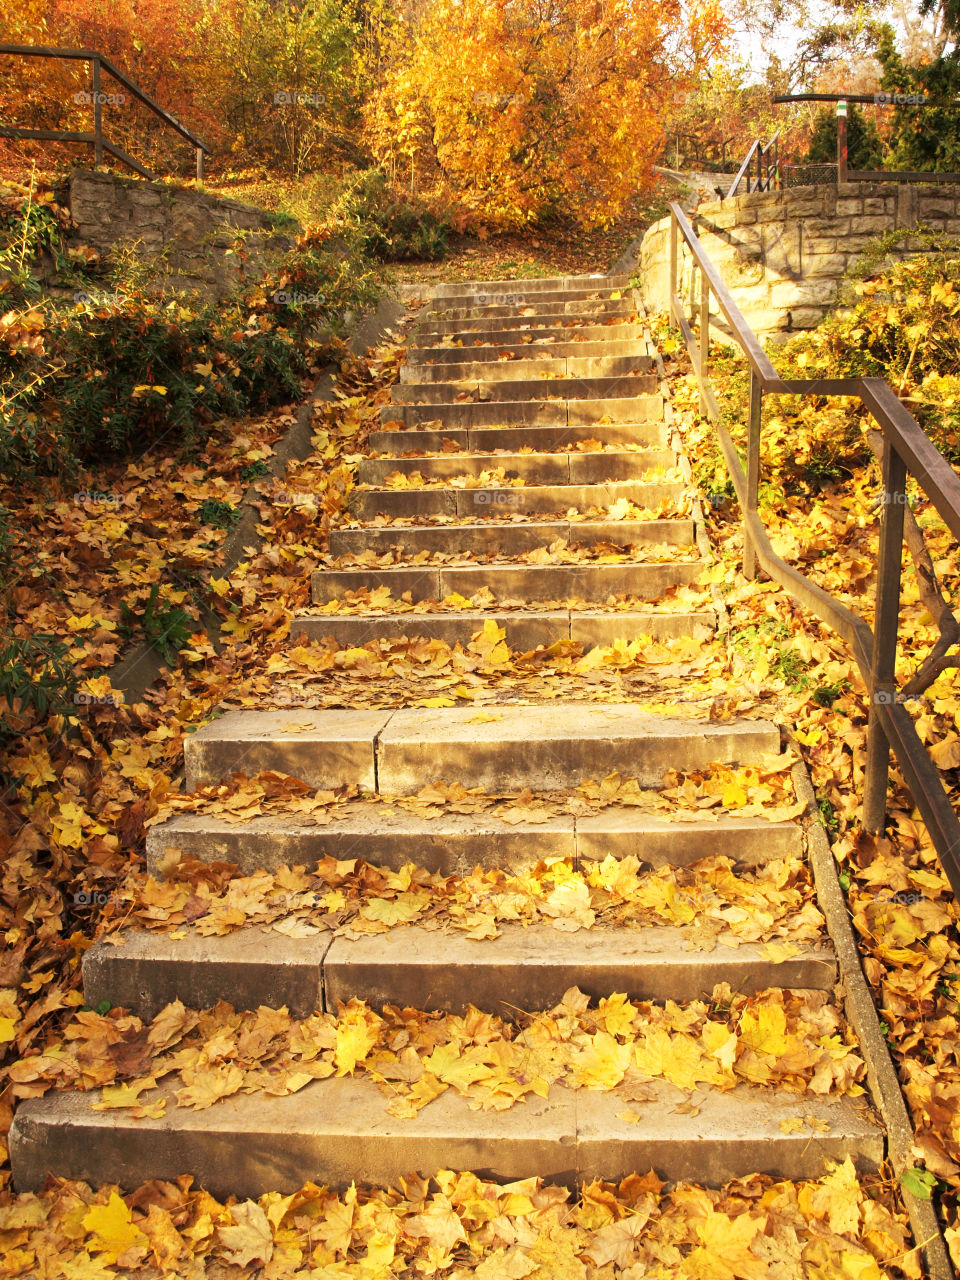 Autumn leaves in staircase